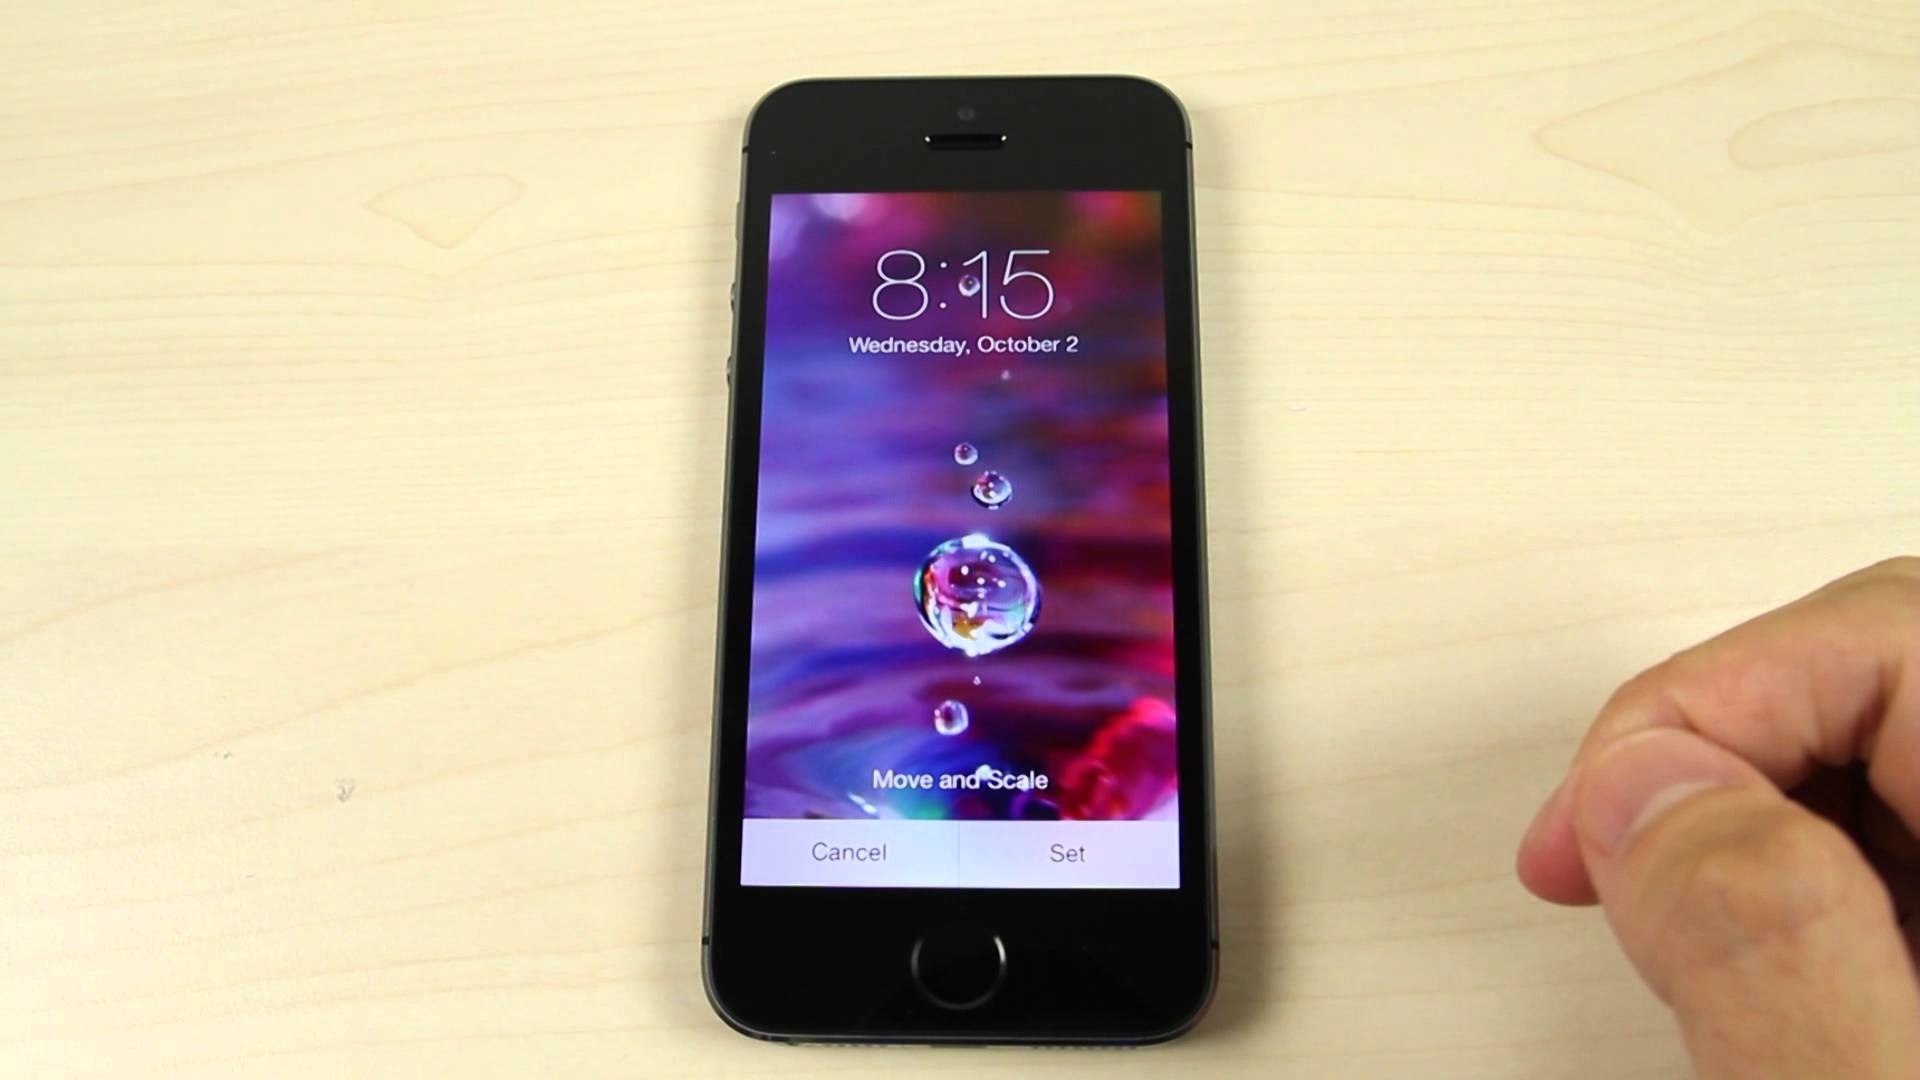 1920x1080 How to change the home screen and lock screen wallpaper on Apple iPhone 5S